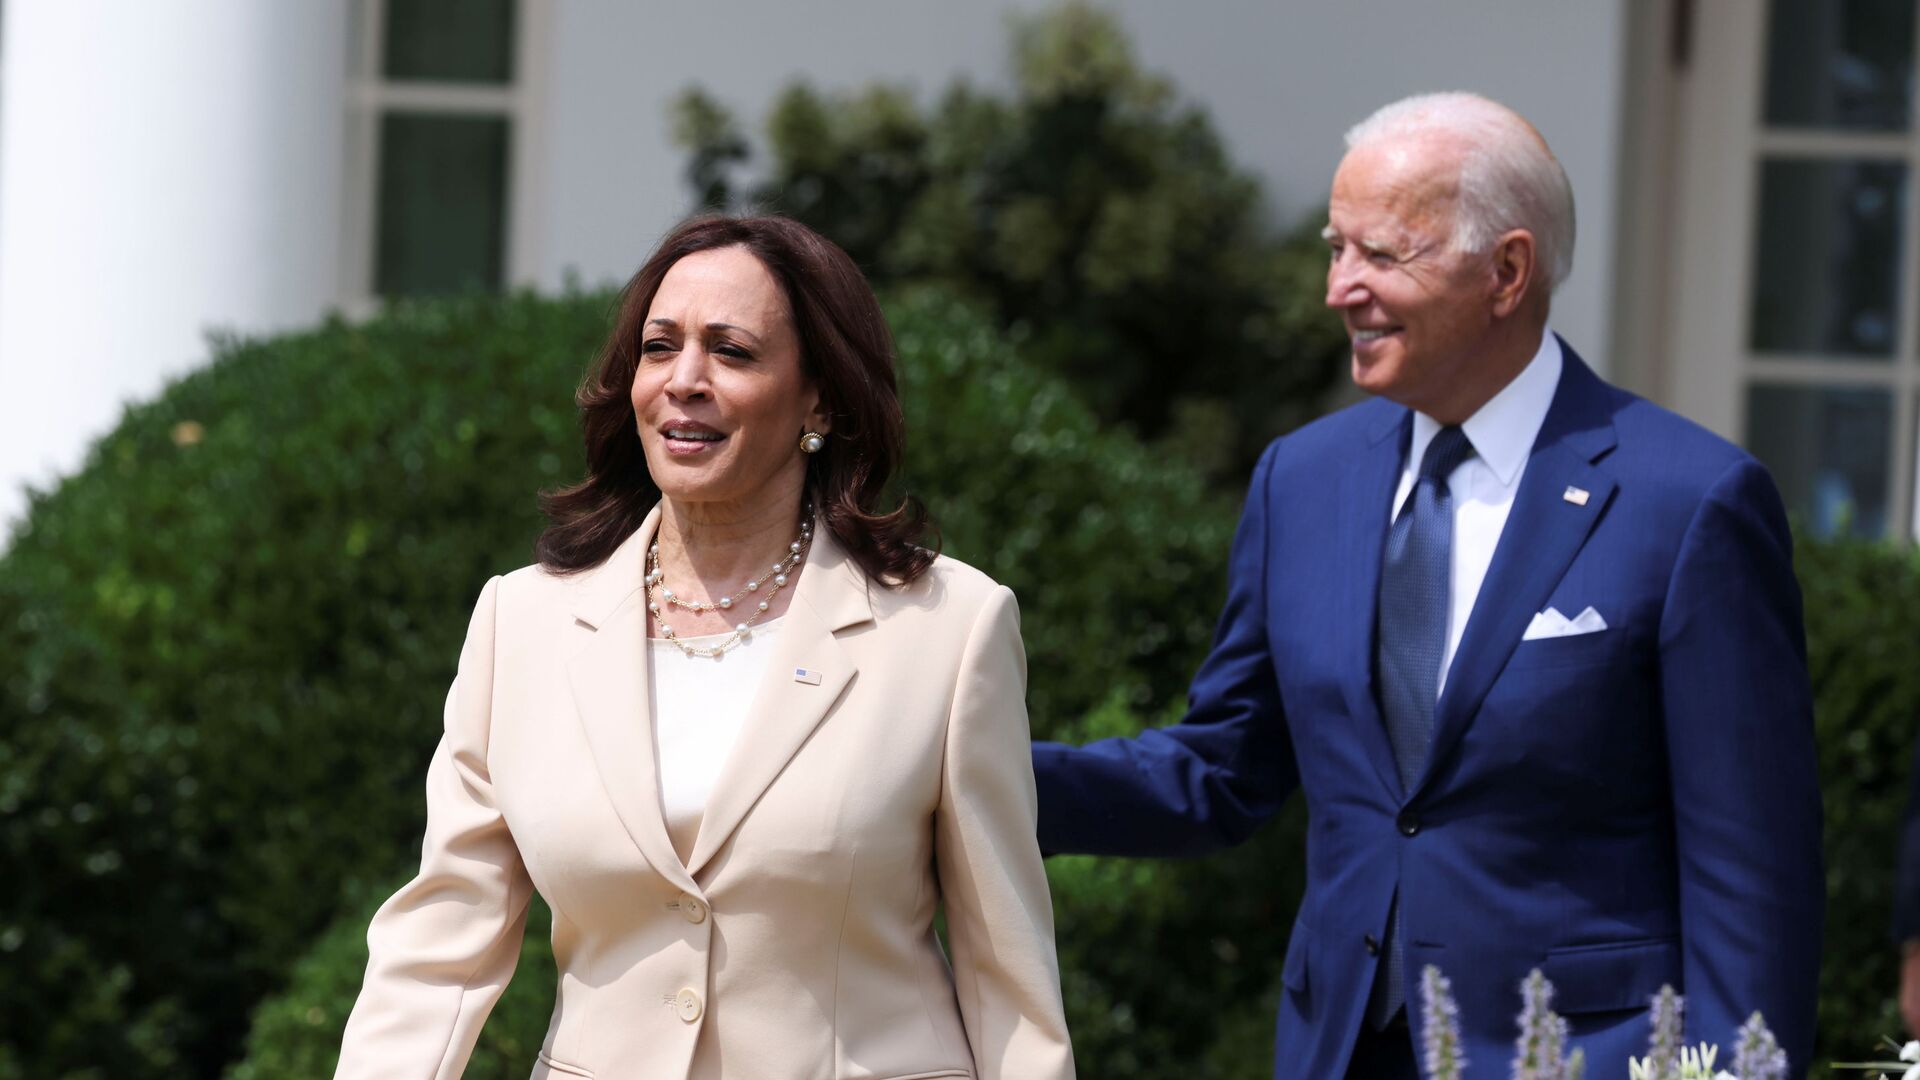 U.S. President Joe Biden and Vice President Kamala Harris arrive for an event to celebrate the 31st anniversary of the Americans with Disabilities Act (ADA) in the White House Rose Garden in Washington, U.S., July 26, 2021 - Sputnik International, 1920, 08.04.2022